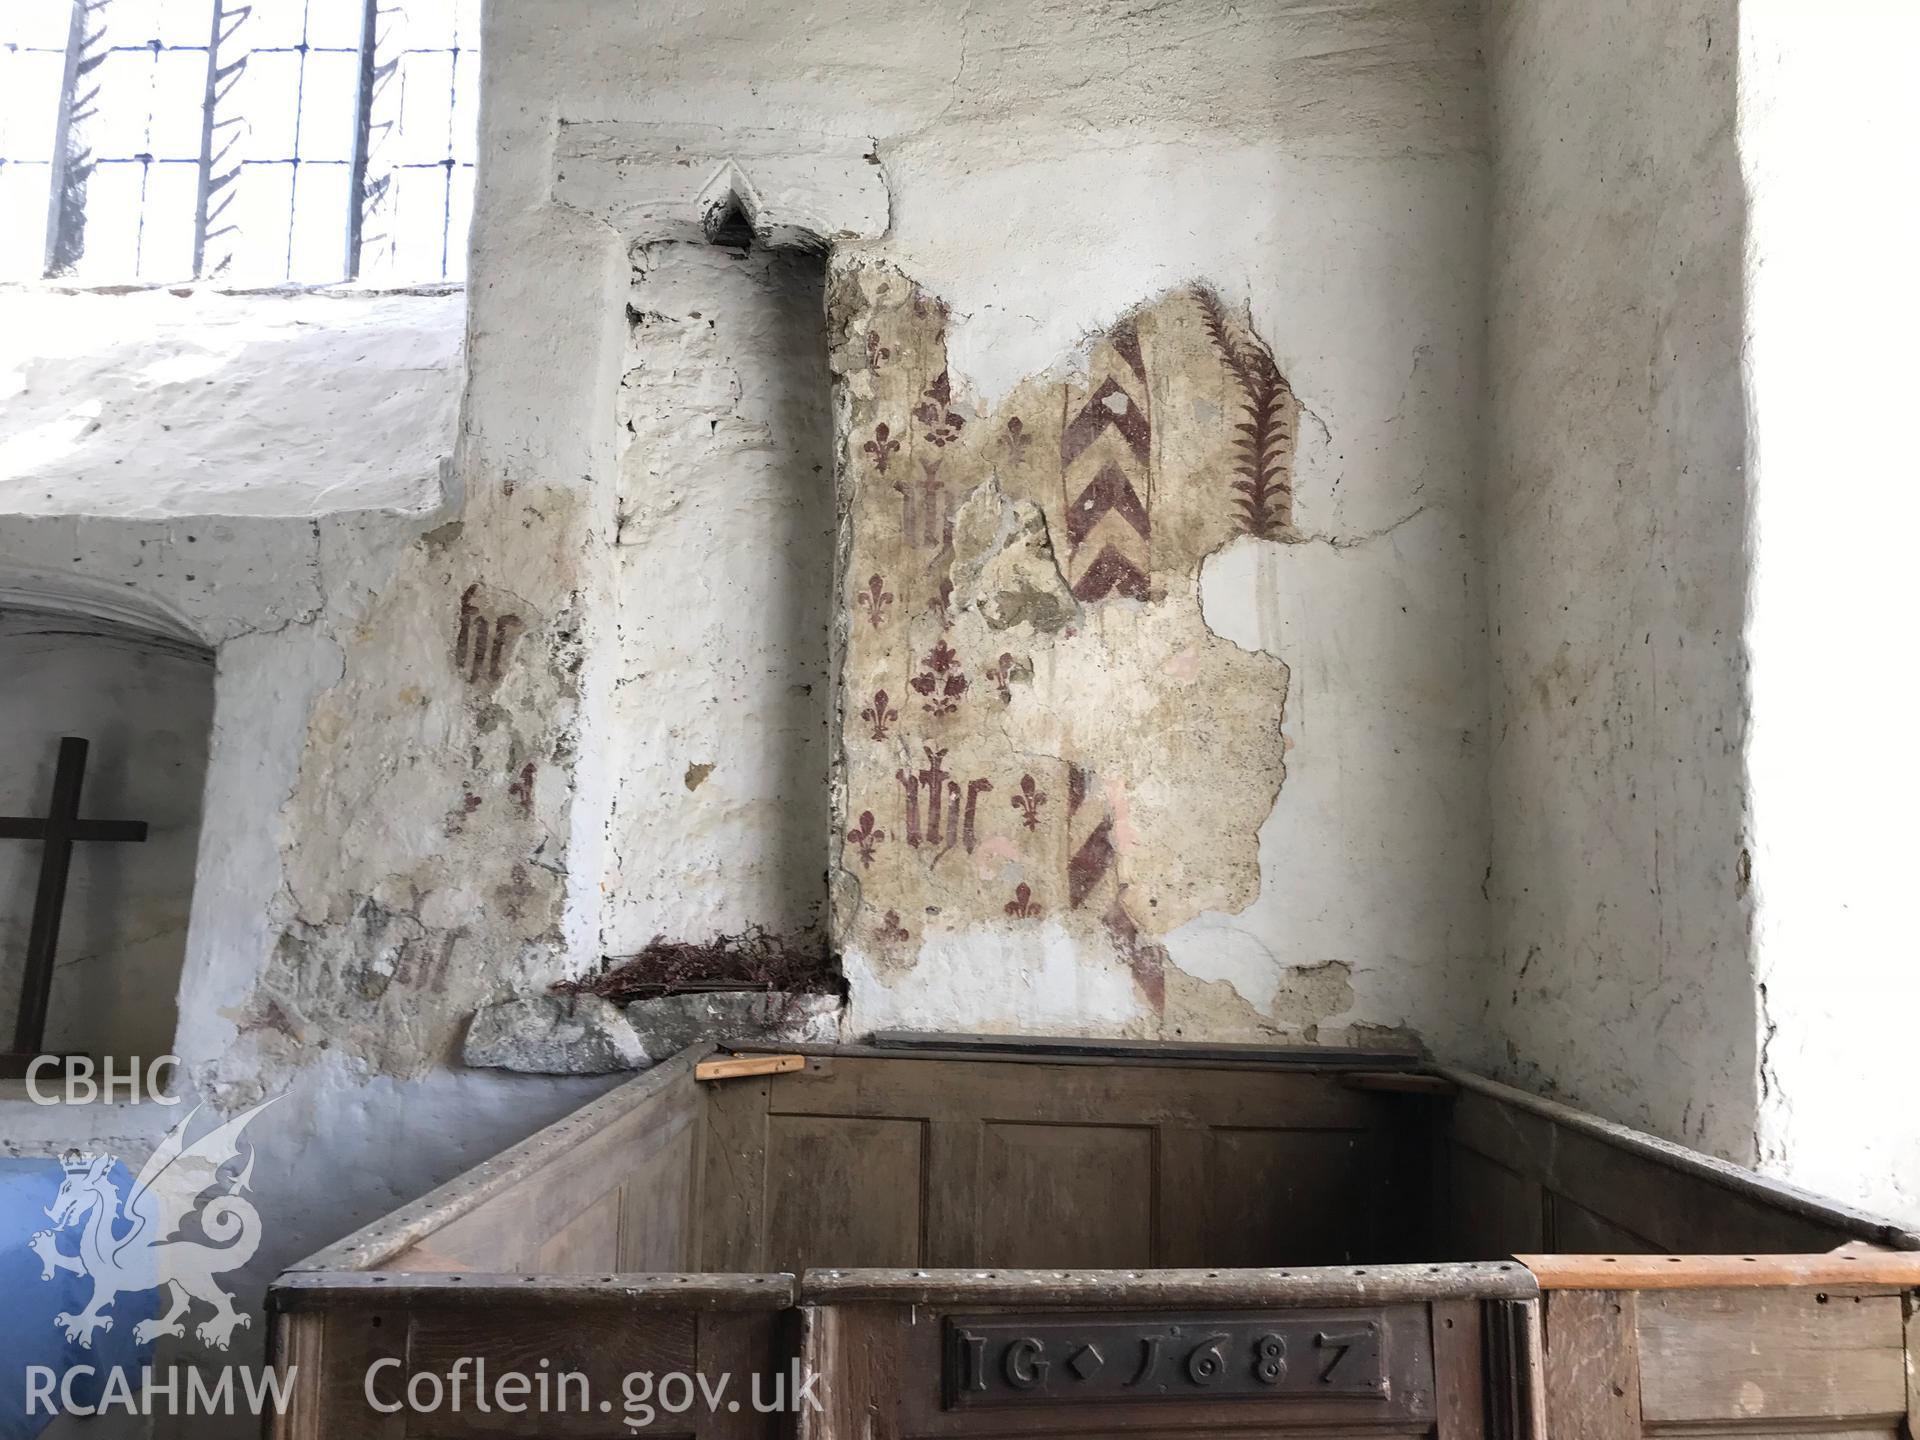 Colour photo showing interior view of St. Cewydd's Church, Diserth, including view of a wooden pew dated 1687, with the initials IG, and fragments of a wall painting, taken by Paul R. Davis, 19th May 2018.